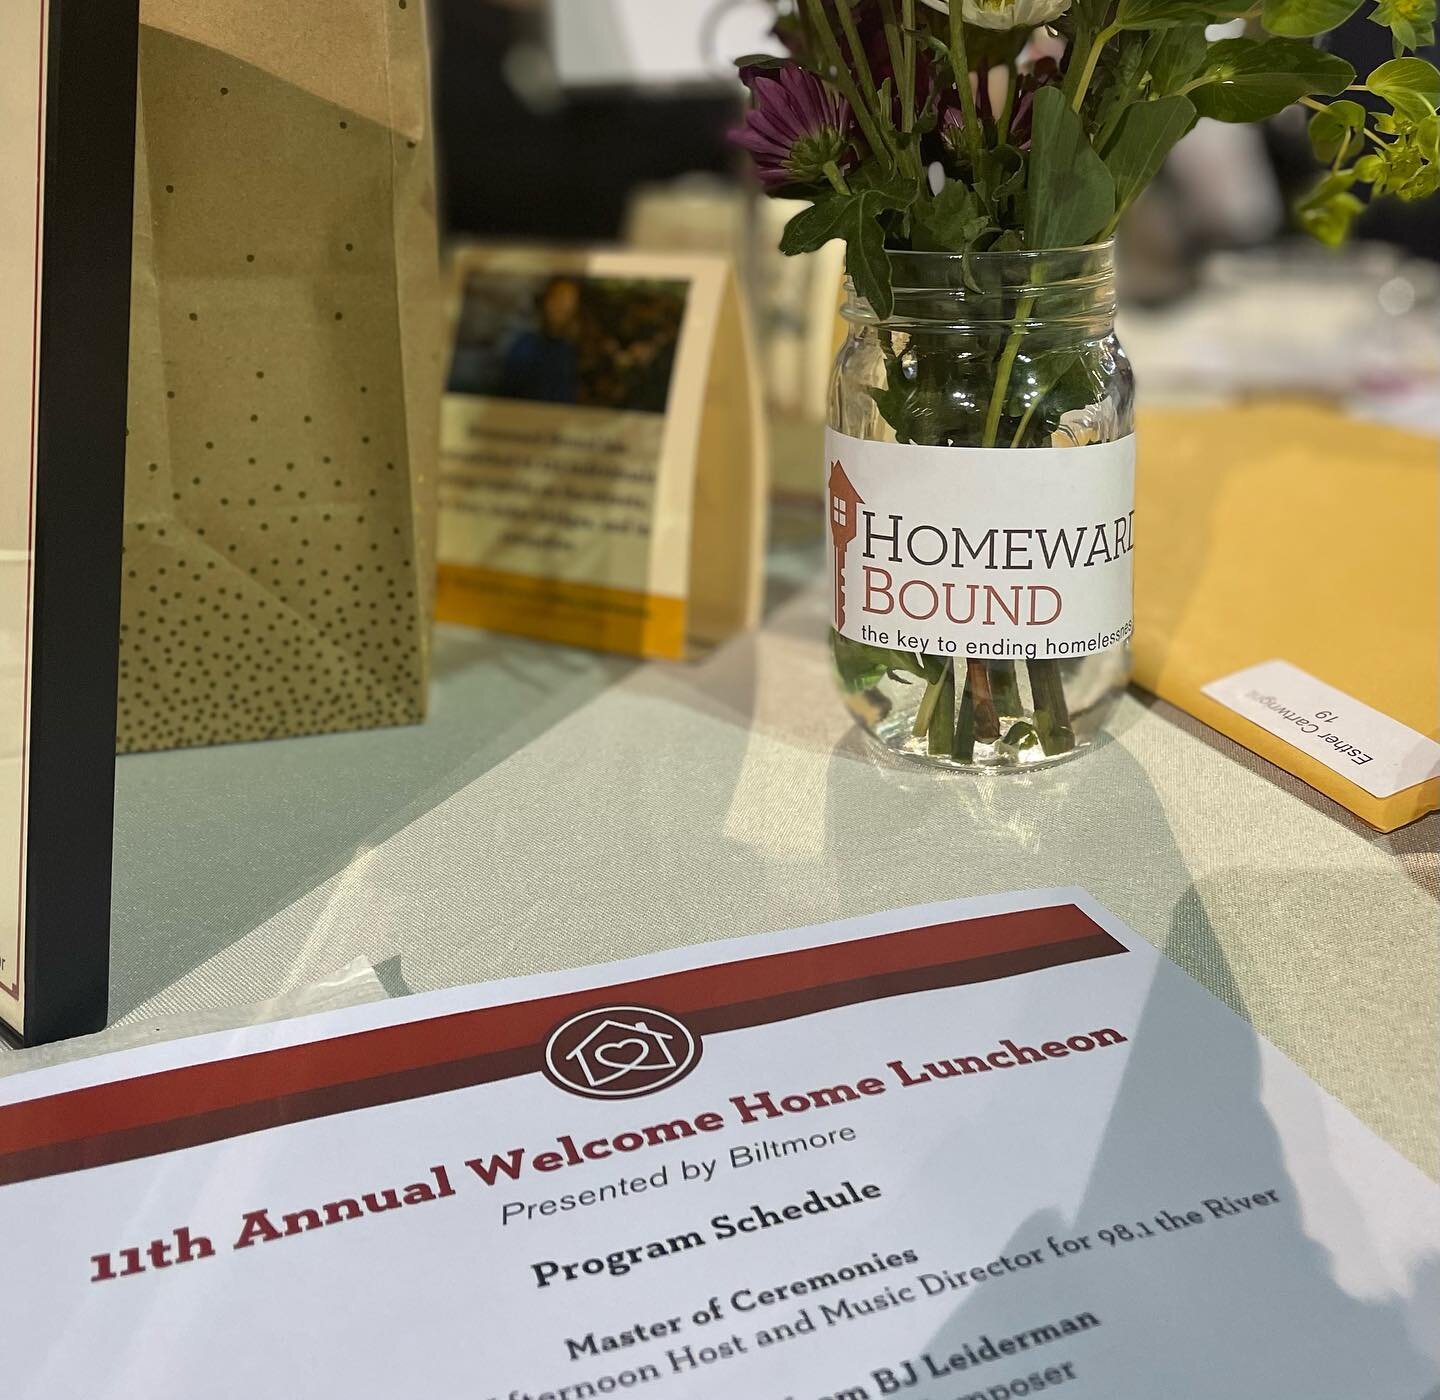 Yesterday was the annual Homeward Bound Luncheon. Happy be alongside other realtors and community members who care about fair housing for all in Asheville. Housing is a human right. Home is where wellness begins. Anyone can become homeless. It is a s